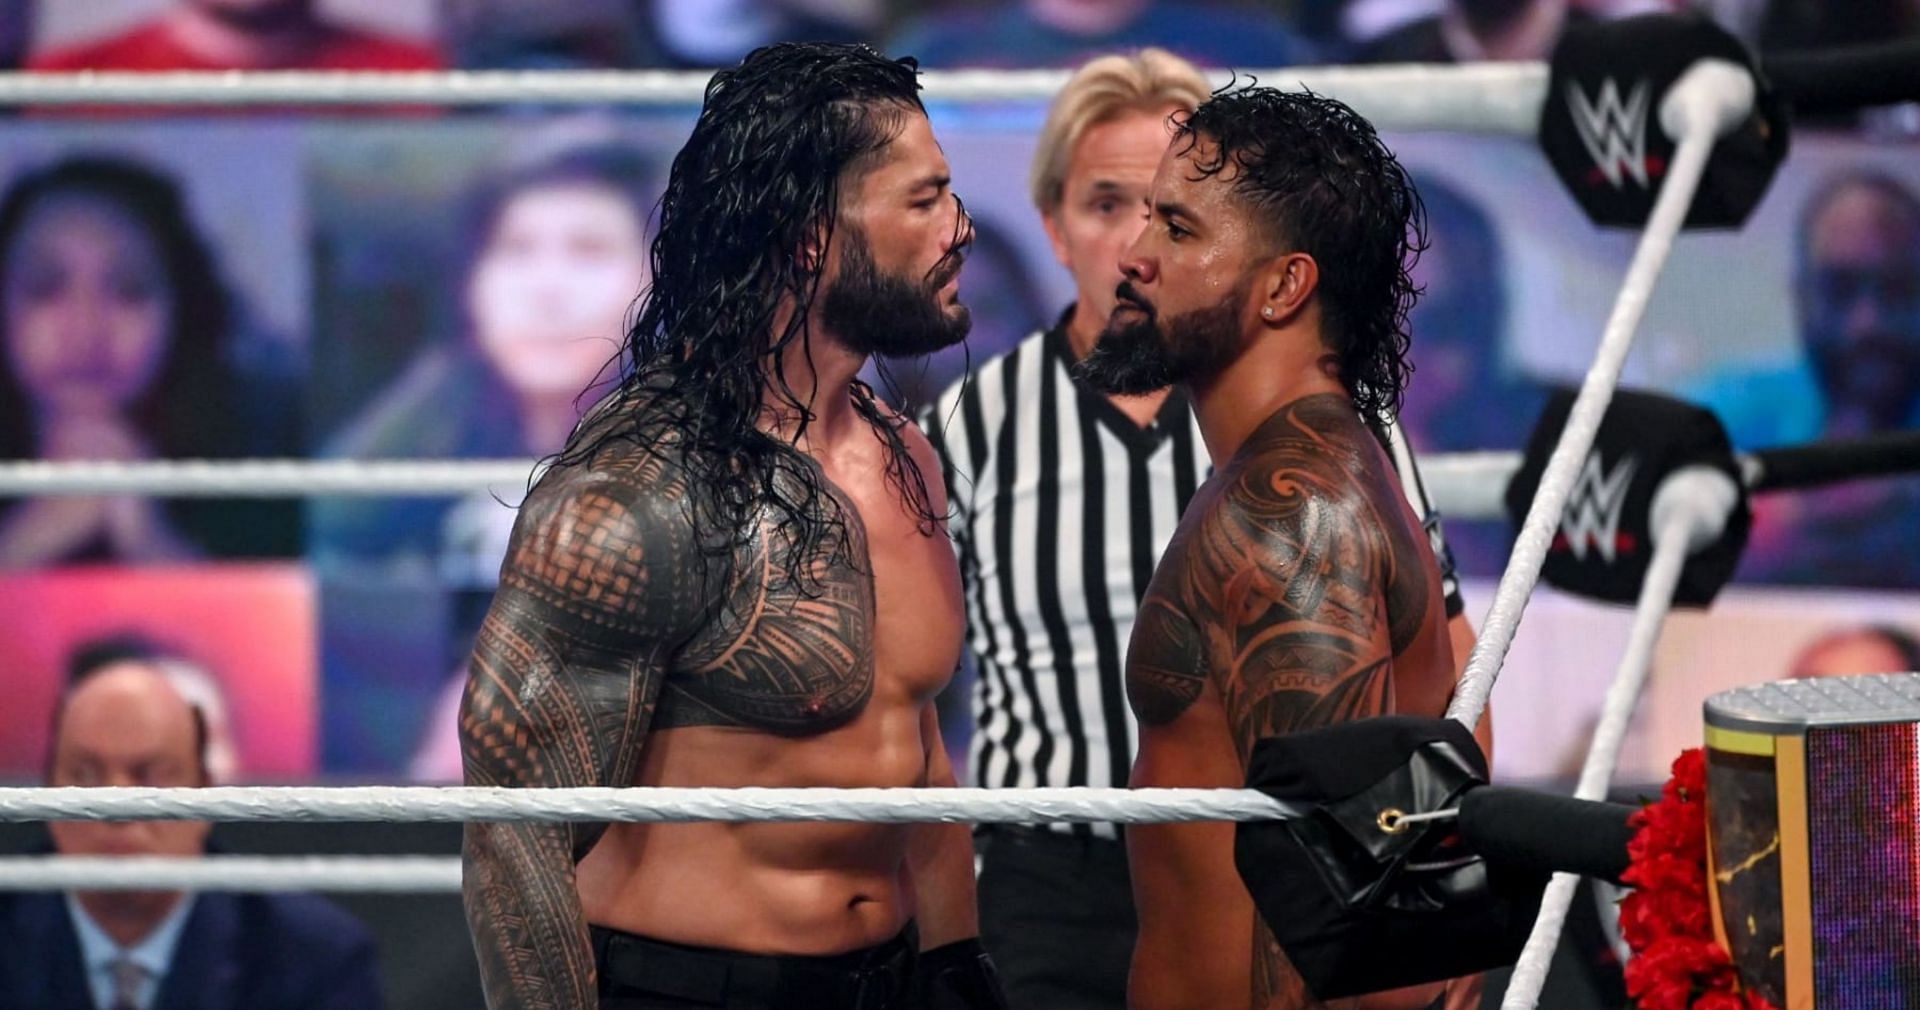 Roman Reigns will defend his title against Jey Uso at SummerSlam